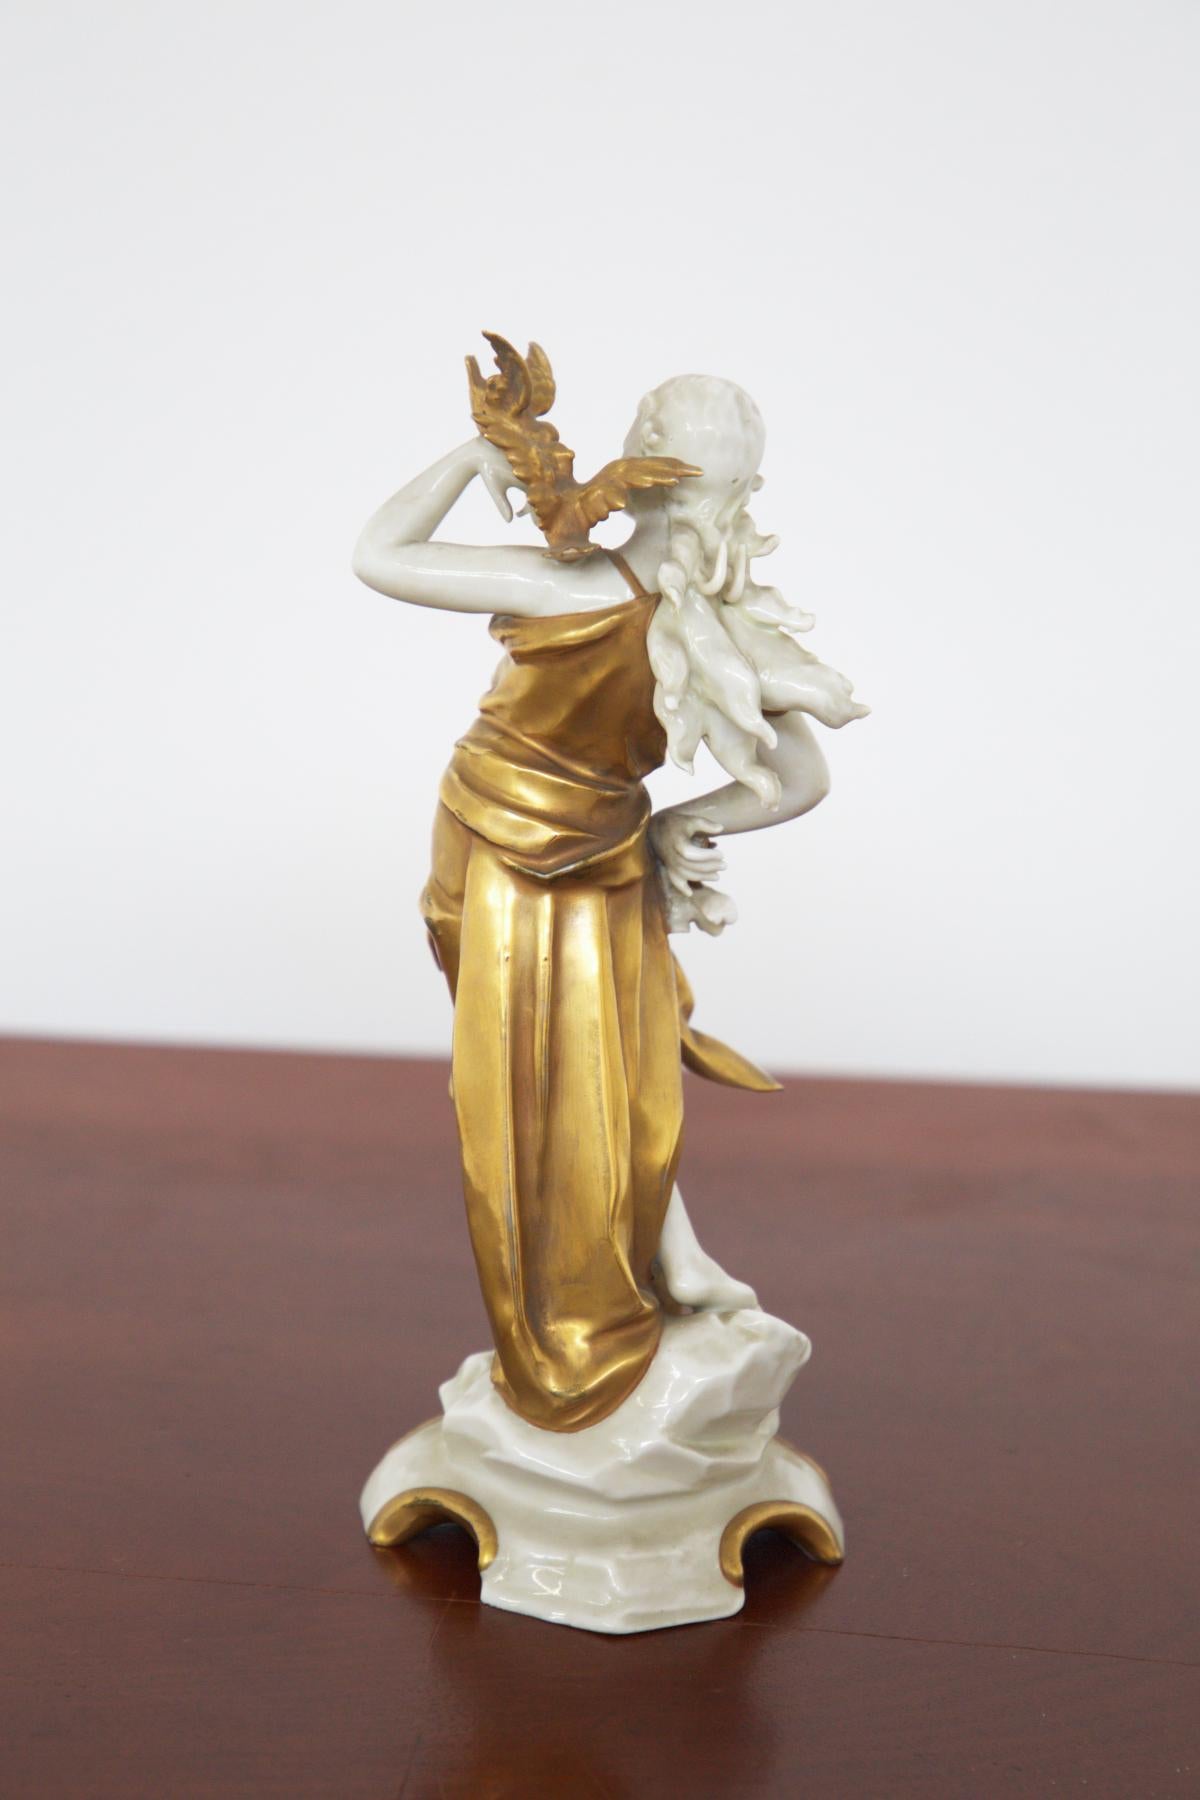 A ceramic figurine, part of the 'Signs of the Zodiac' collection, made in the early 20th century from Capodimonte ceramic painted in gold.
Capodimonte is a type of Italian porcelain first developed in the 18th century. It is known for its bright